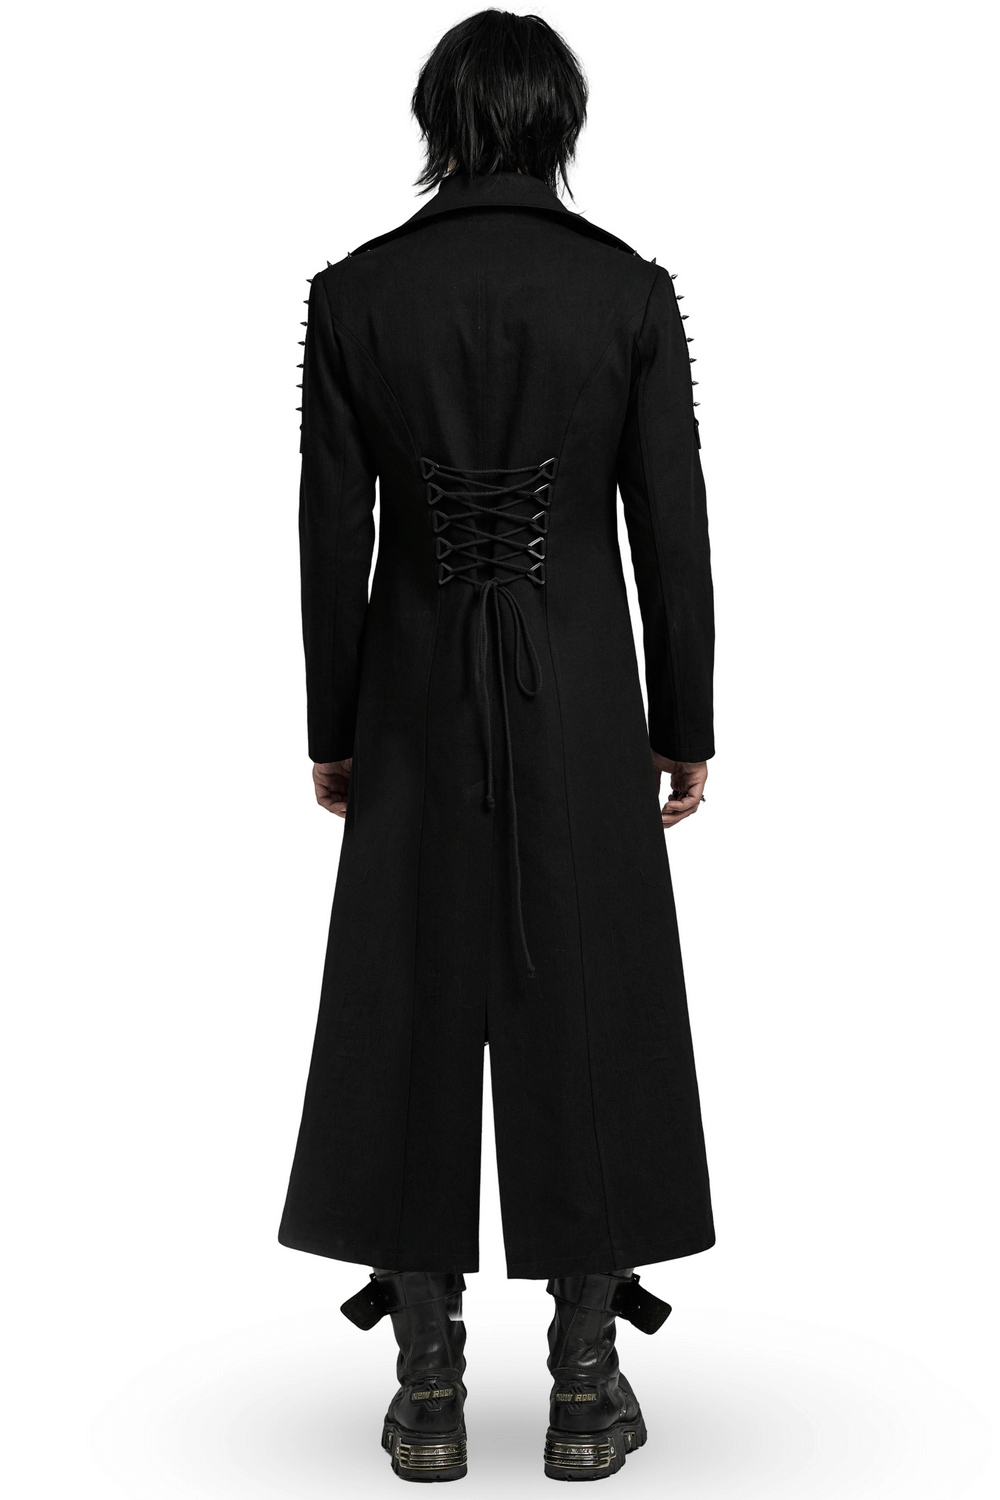 Edgy Punk-Style Long Coat with Industrial Accents